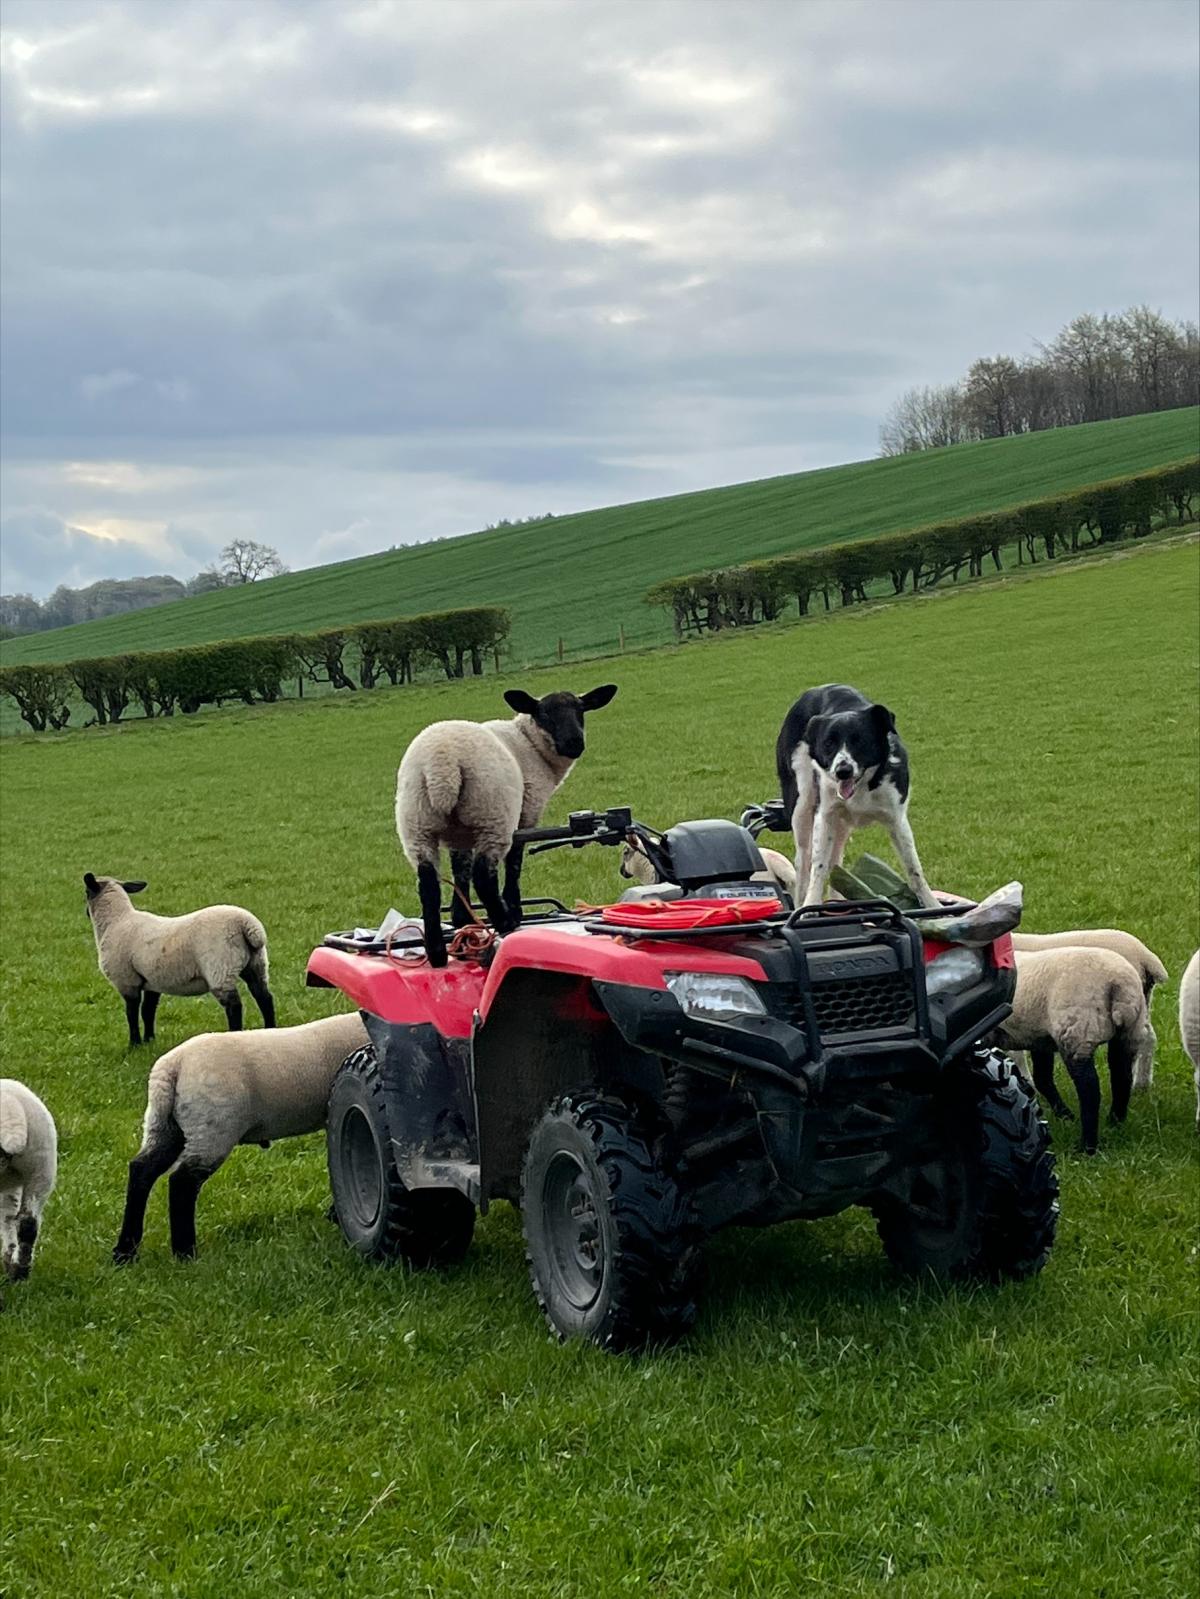 Joanna Forster - A photo of my dog Tib getting a help to check the sheep near Lilliesleaf